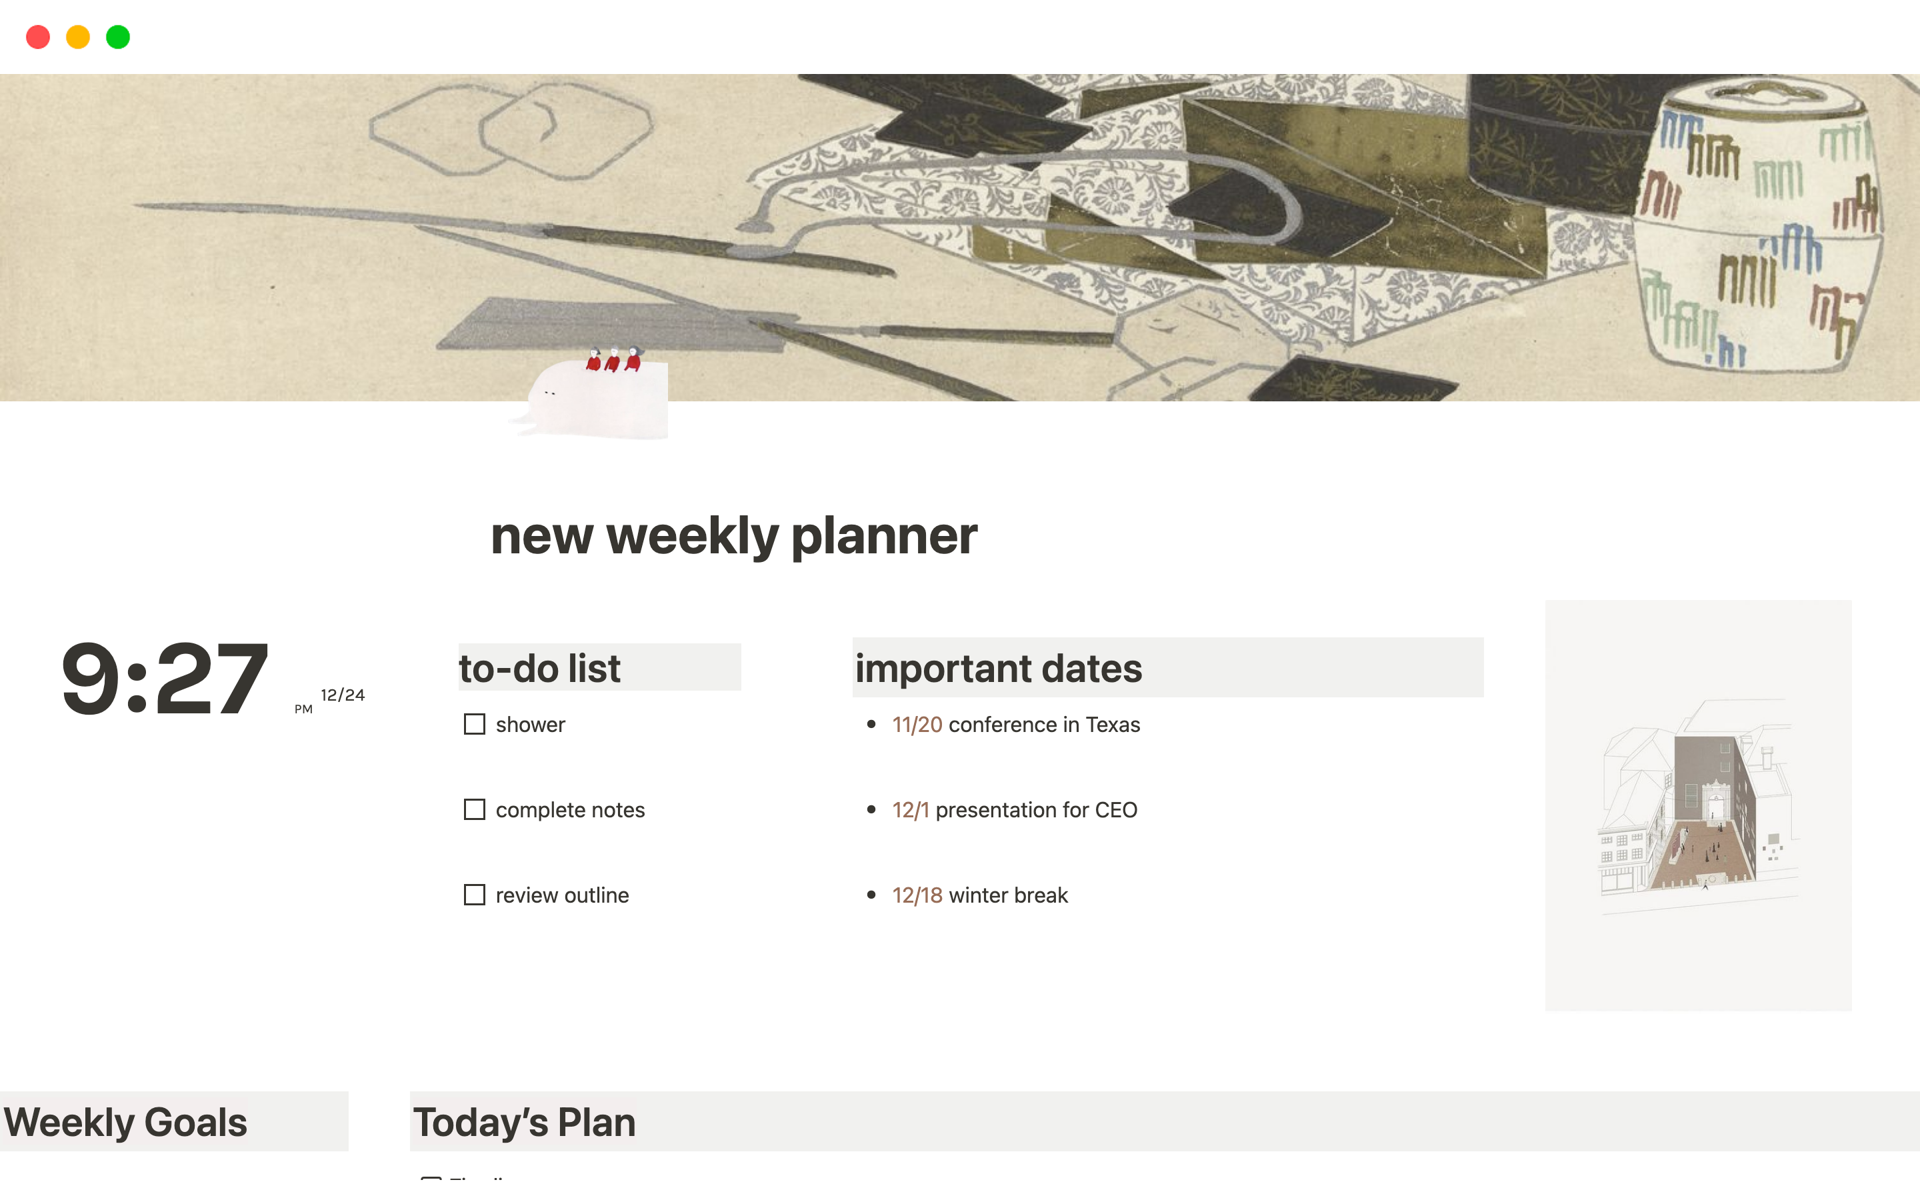 A new and improved weekly planner